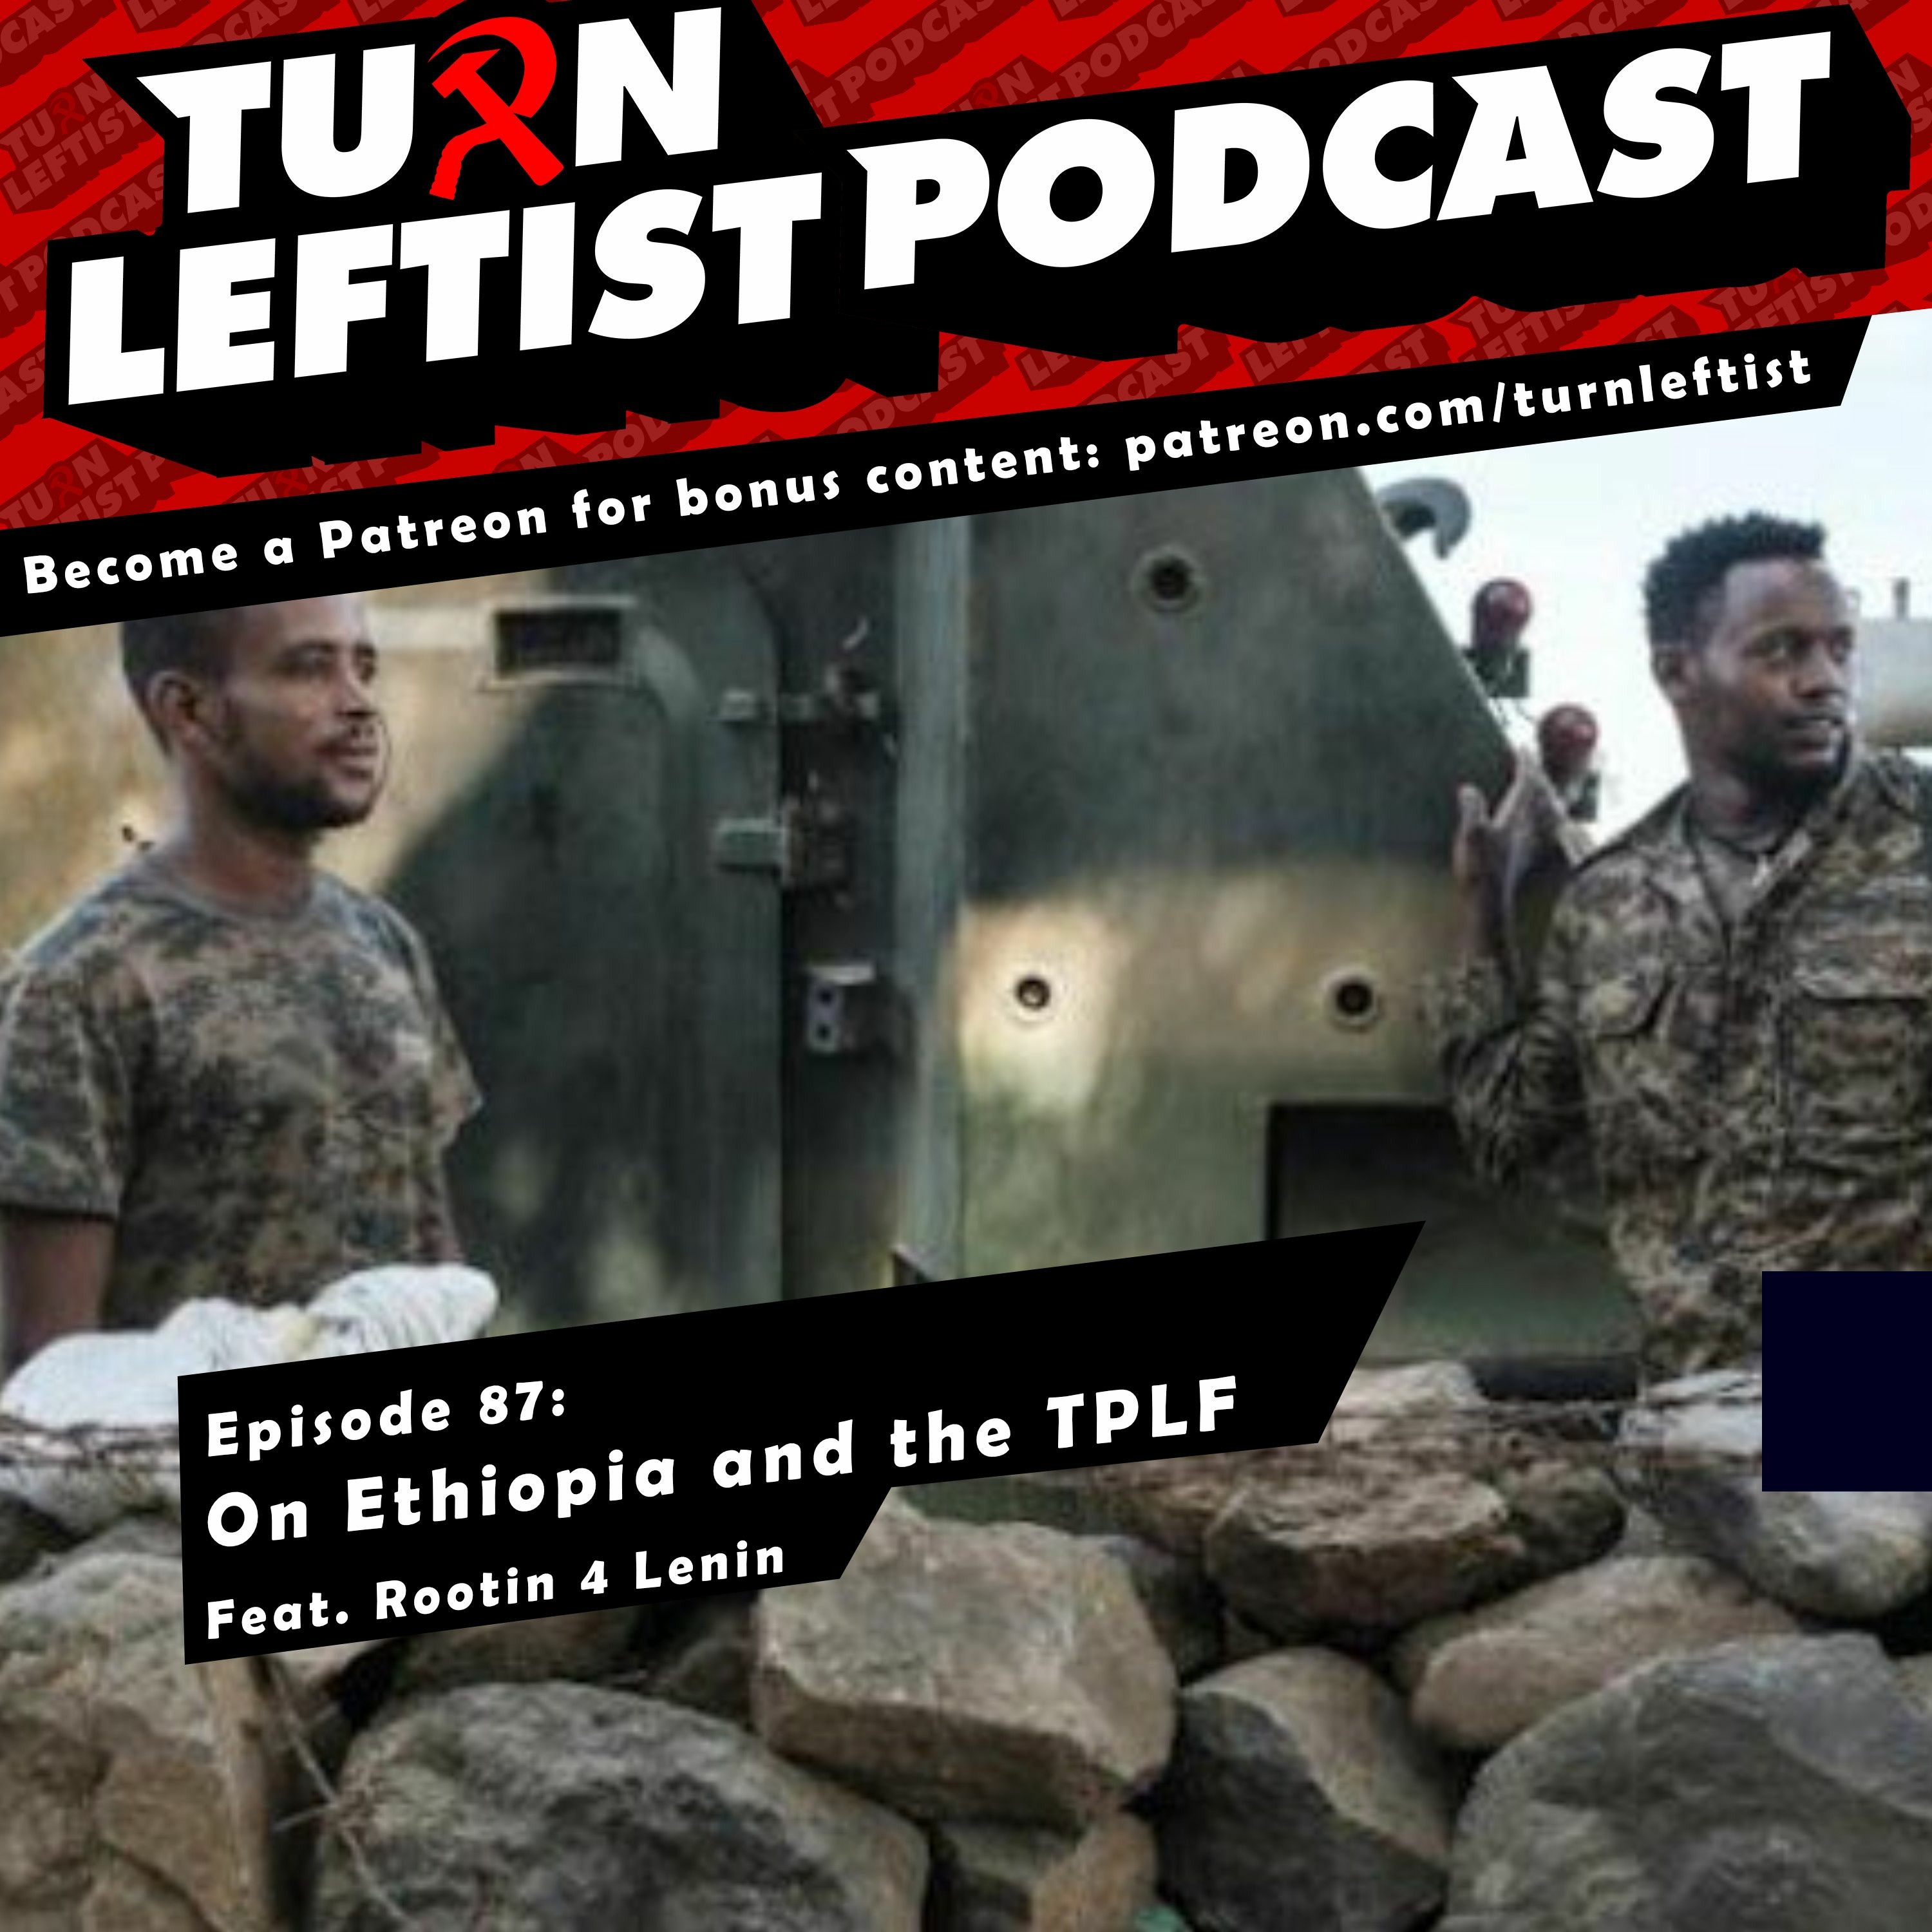 087: On Ethiopia and the TPLF with Rootin 4 Lenin